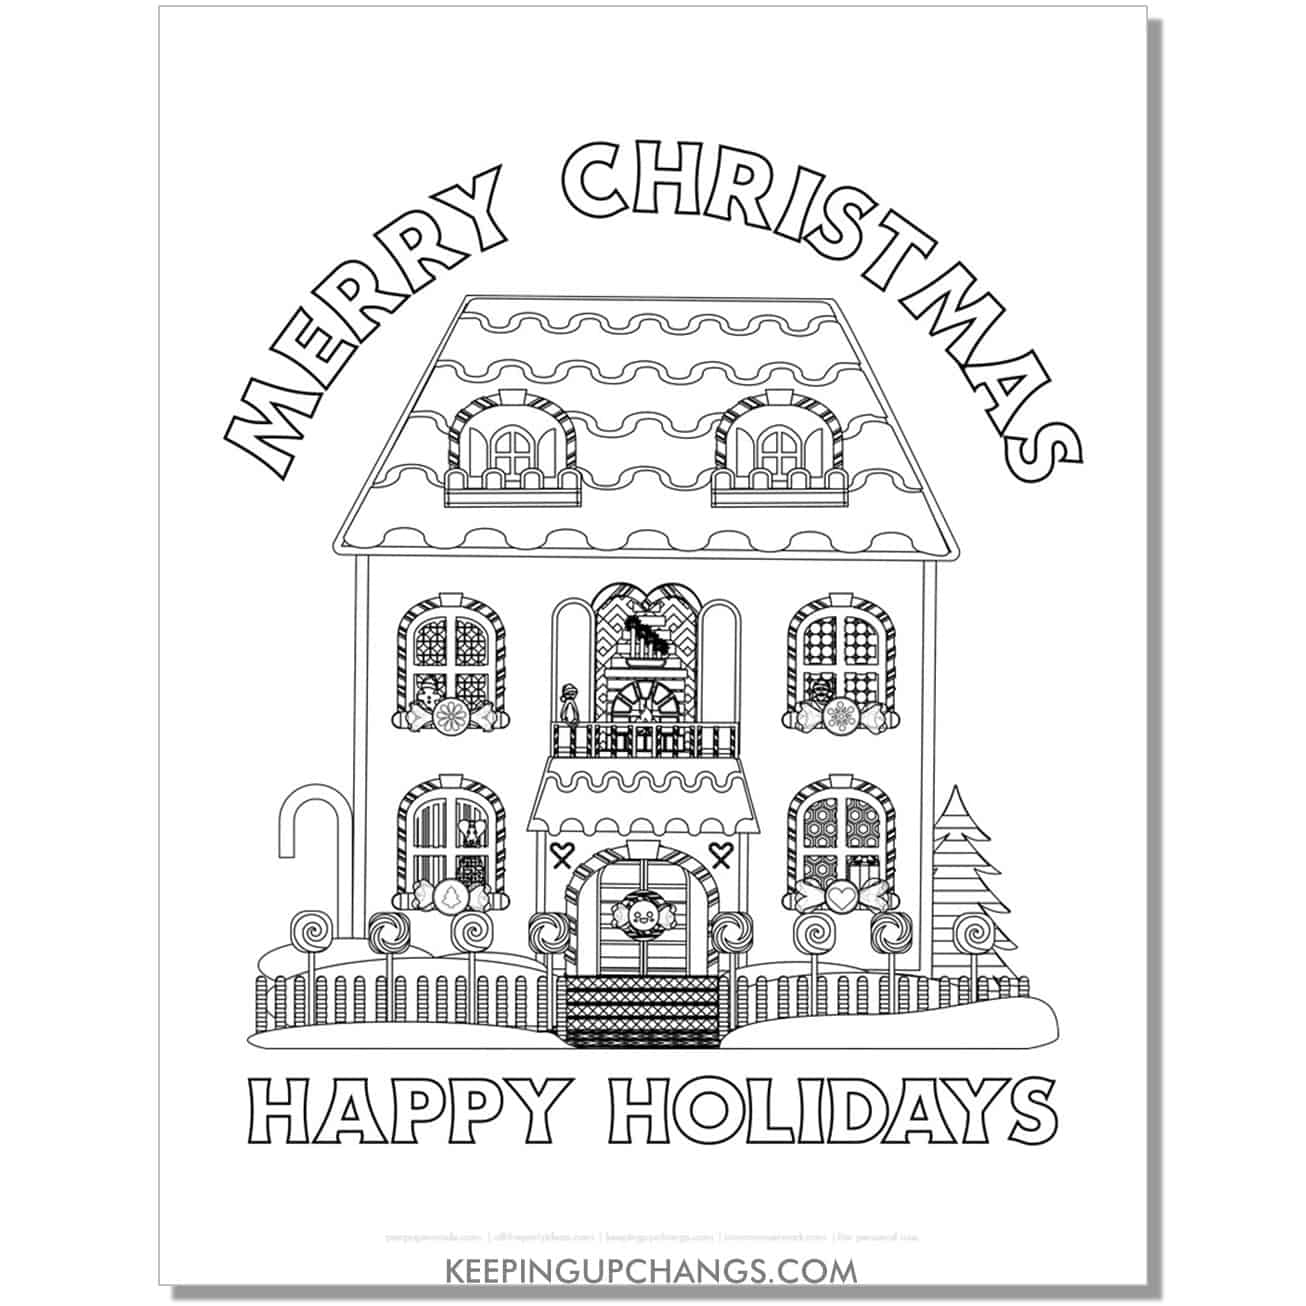 free merry christmas, happy holidays detailed gingerbread house with lollipop fence coloring page.